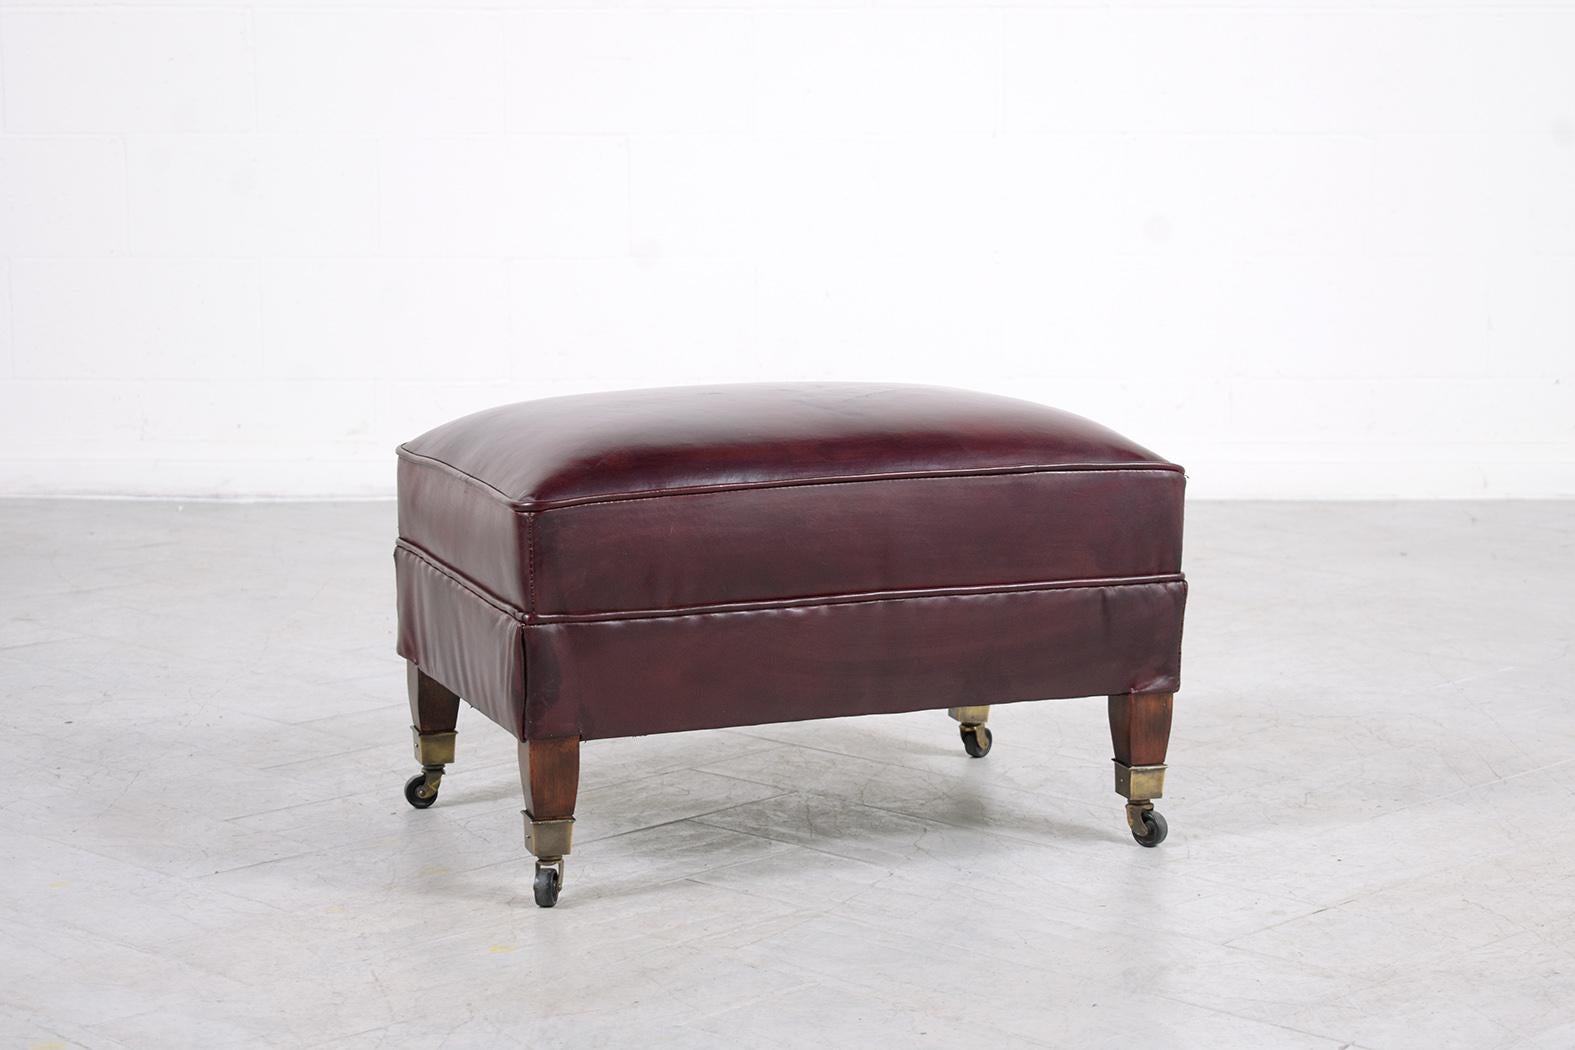 Antique English Chesterfield Lounge Chair: Cordovan Red Leather Tufted Design For Sale 5